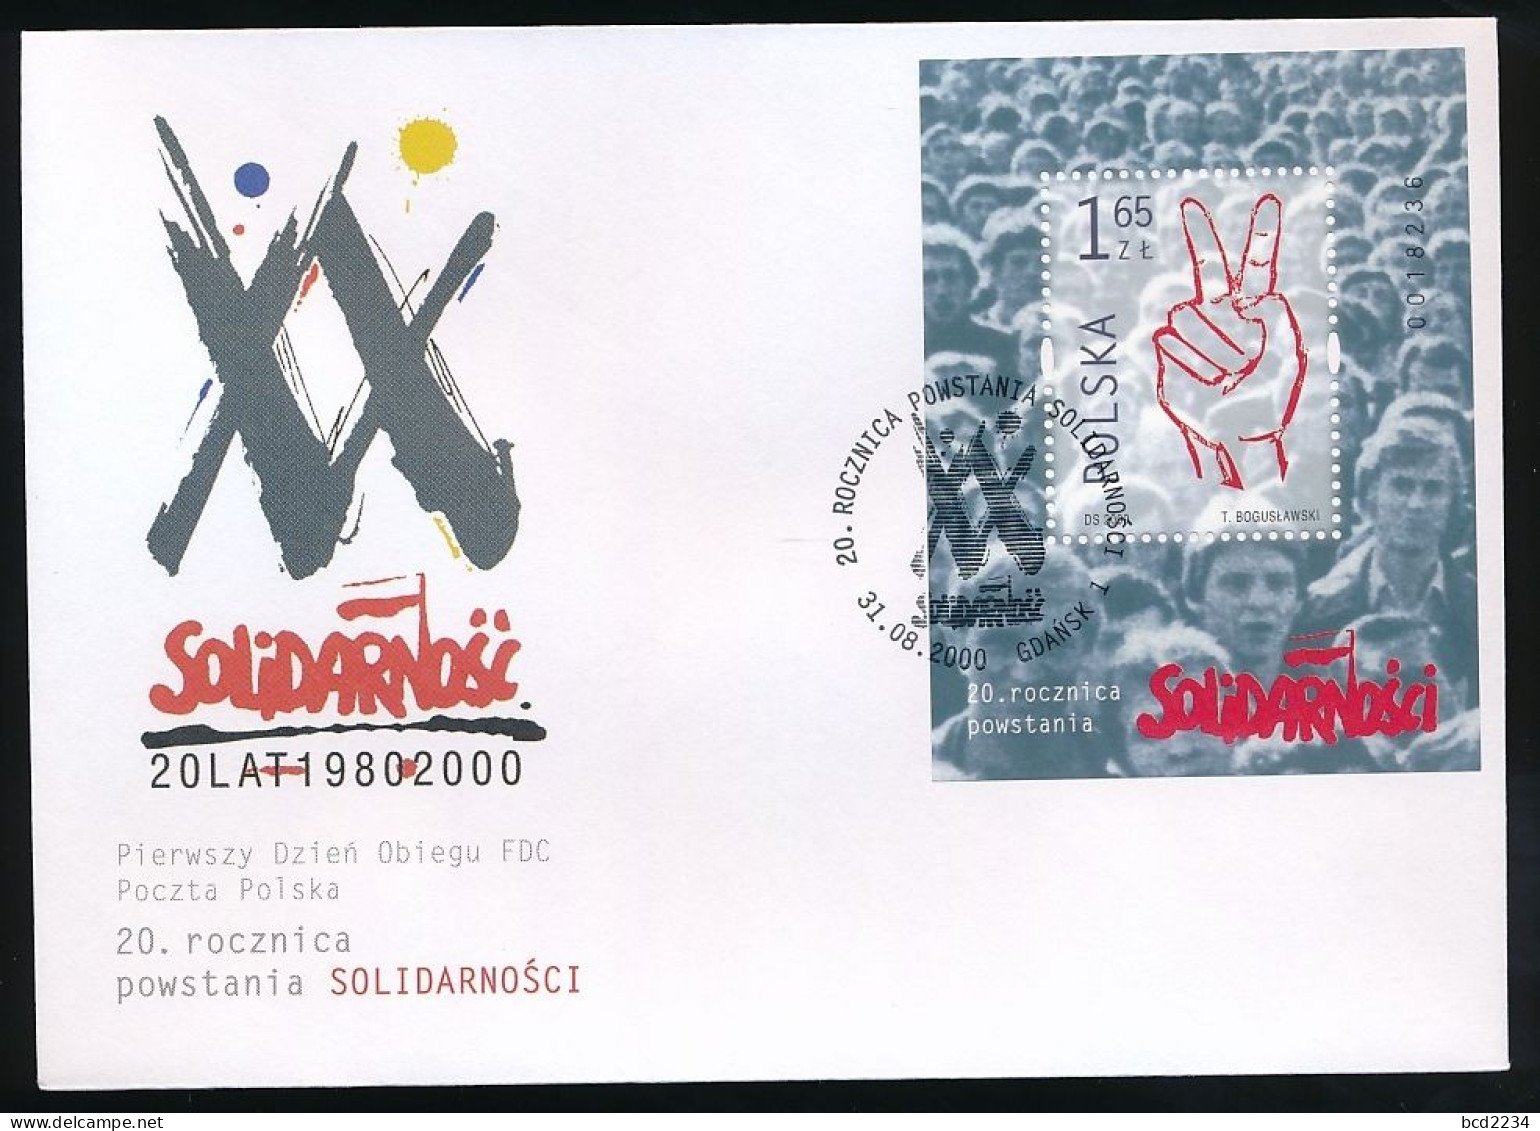 POLAND FDC 2000 SOLIDARITY SOLIDARNOSC 20TH ANNIV OF THE TRADE UNION MS V FOR VICTORY SIGN 2 FINGERS GDANSK DANZIG - Brieven En Documenten